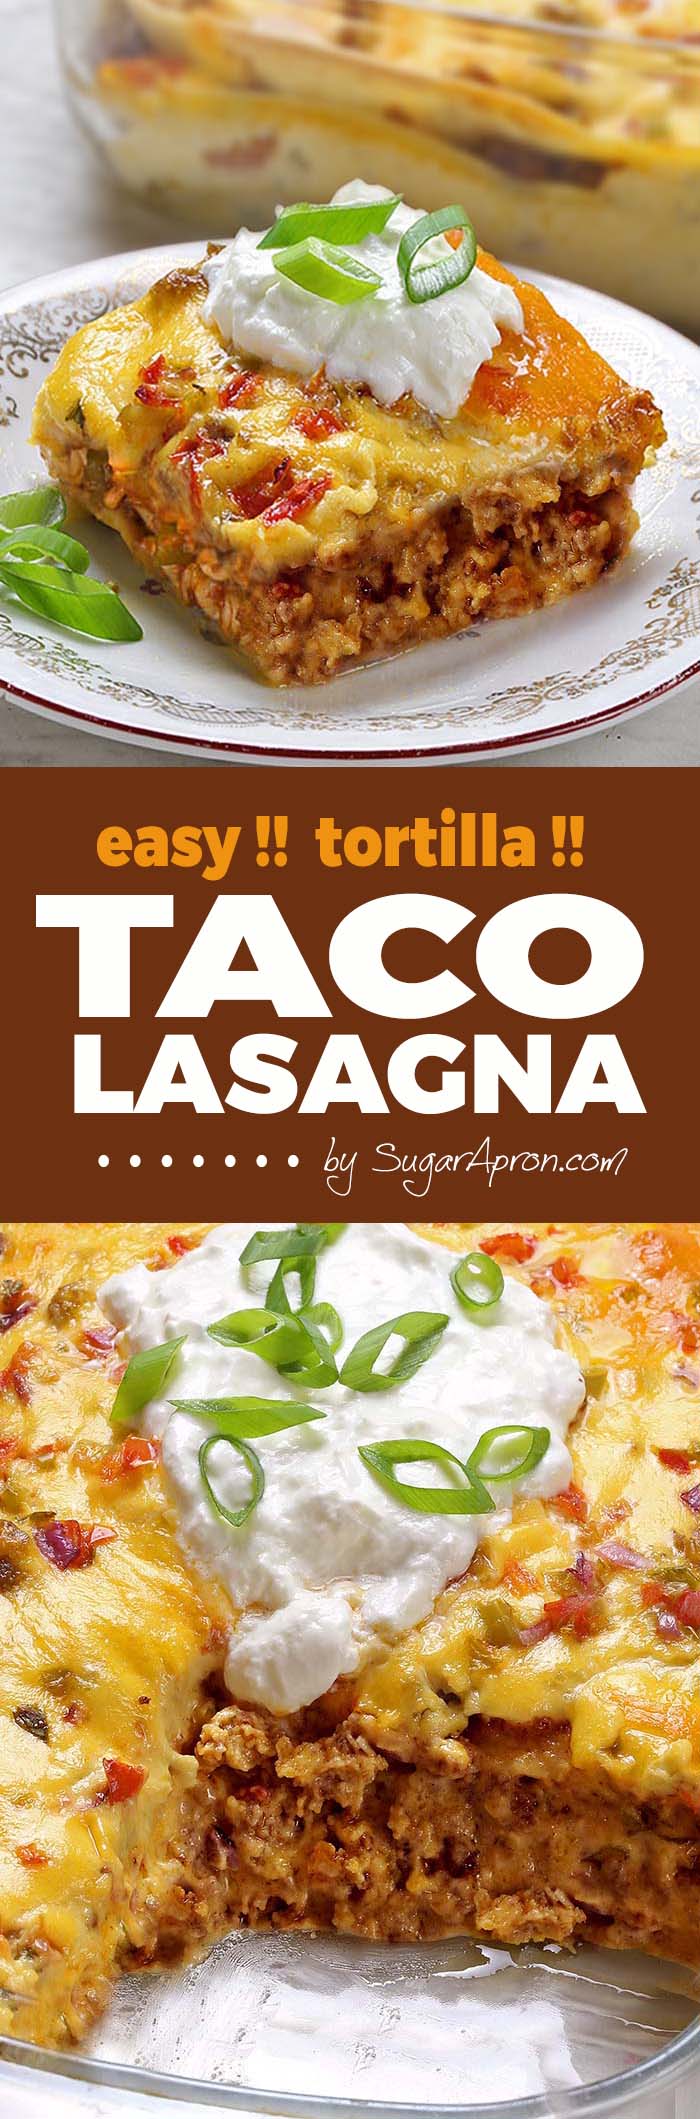 Need an easy recipe to feed a crowd? Taco Lasagna is layered casserole with tortillas, taco seasoned ground beef, pico de gallo sauce or salsa and cheese. Perfect for busy nights!